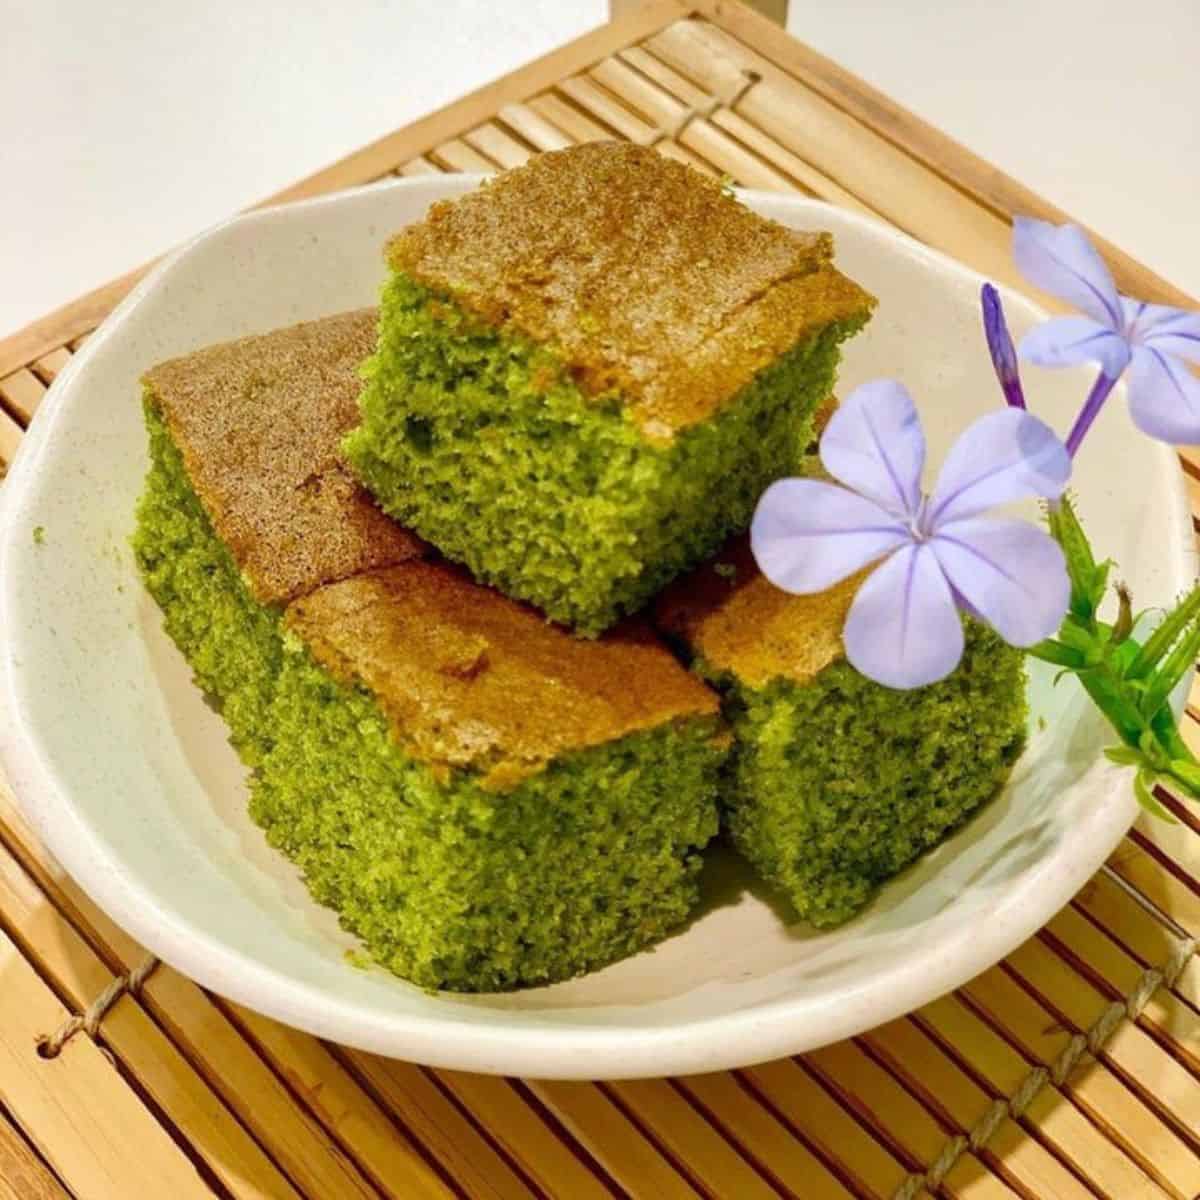 Cube slices of green tea treat on a bamboo rack